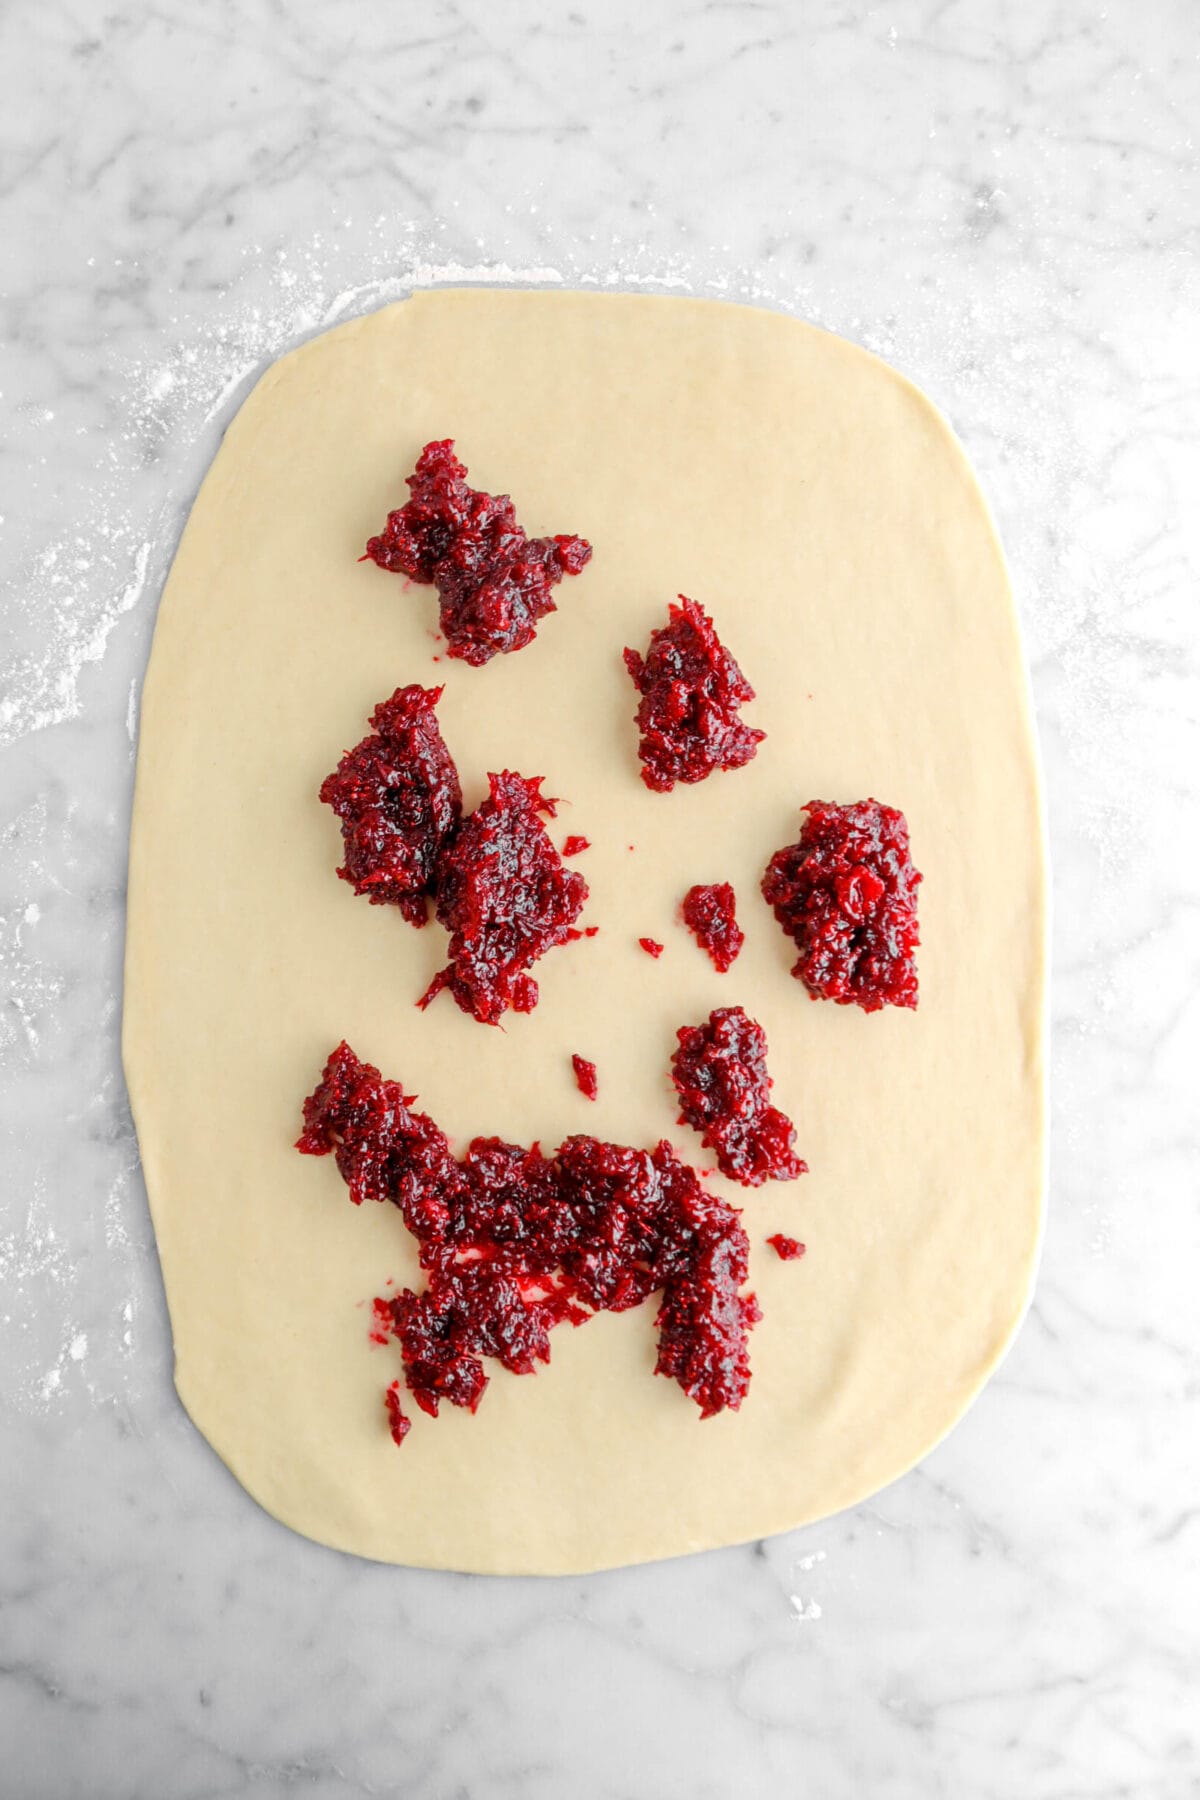 dollops of cranberry jam on rolled out sweet dough on marble surface.